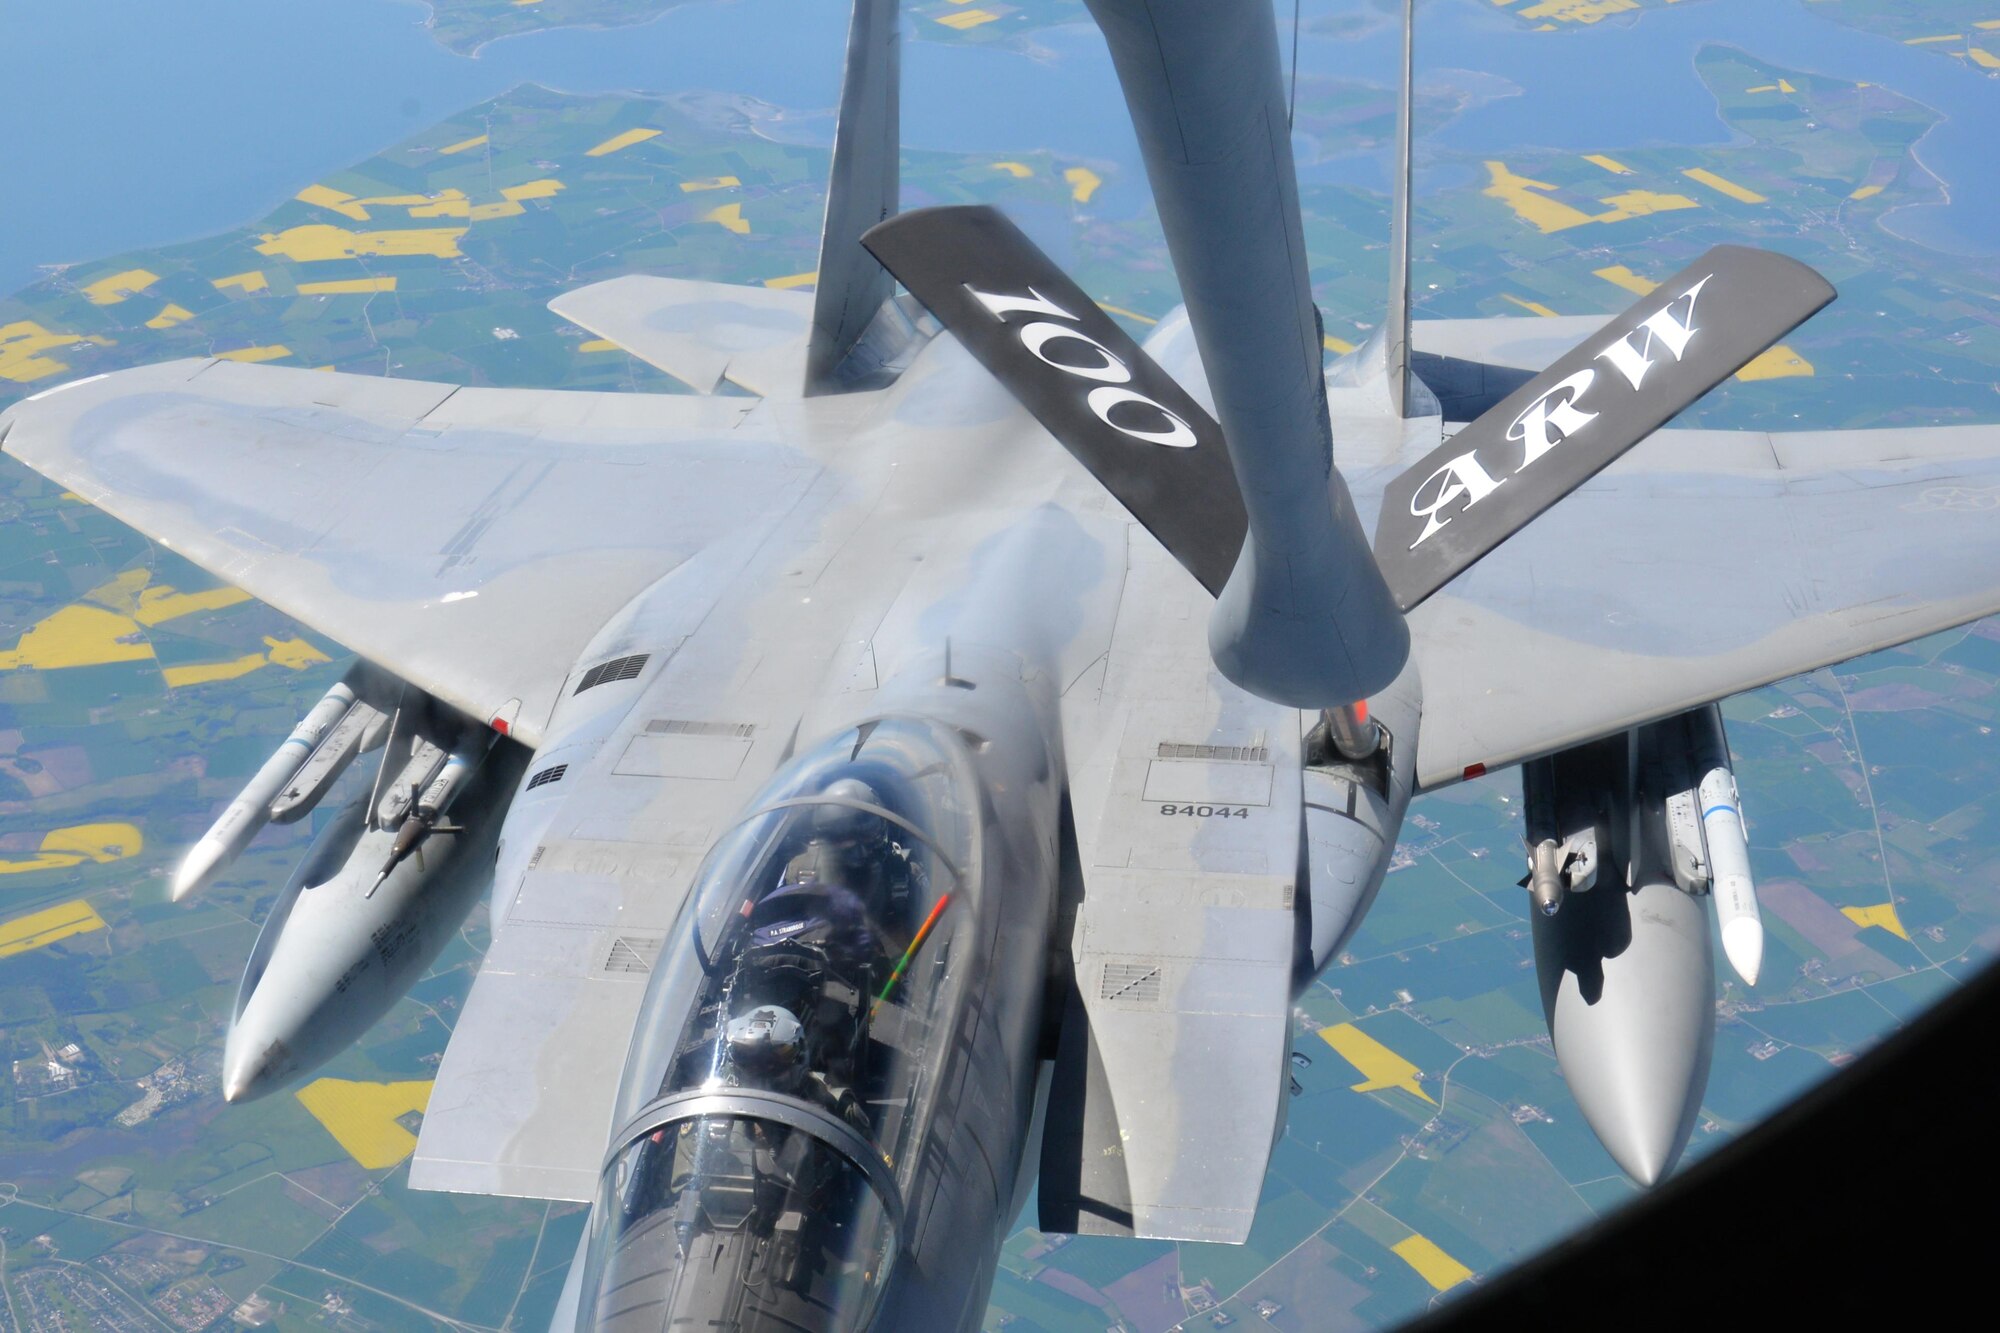 An F-15E Strike Eagle from RAF Lakenheath, England, receives fuel from a KC-135 Stratotanker May 19, 2017. The KC-135 is assigned to RAF Mildenhall, England. Both aircraft are on their way to support Arctic Challenge 2017, a multinational exercise encompassing 11 nations and more than 100 aircraft. (U.S. Air Force photo by Tech. Sgt. David Dobrydney)